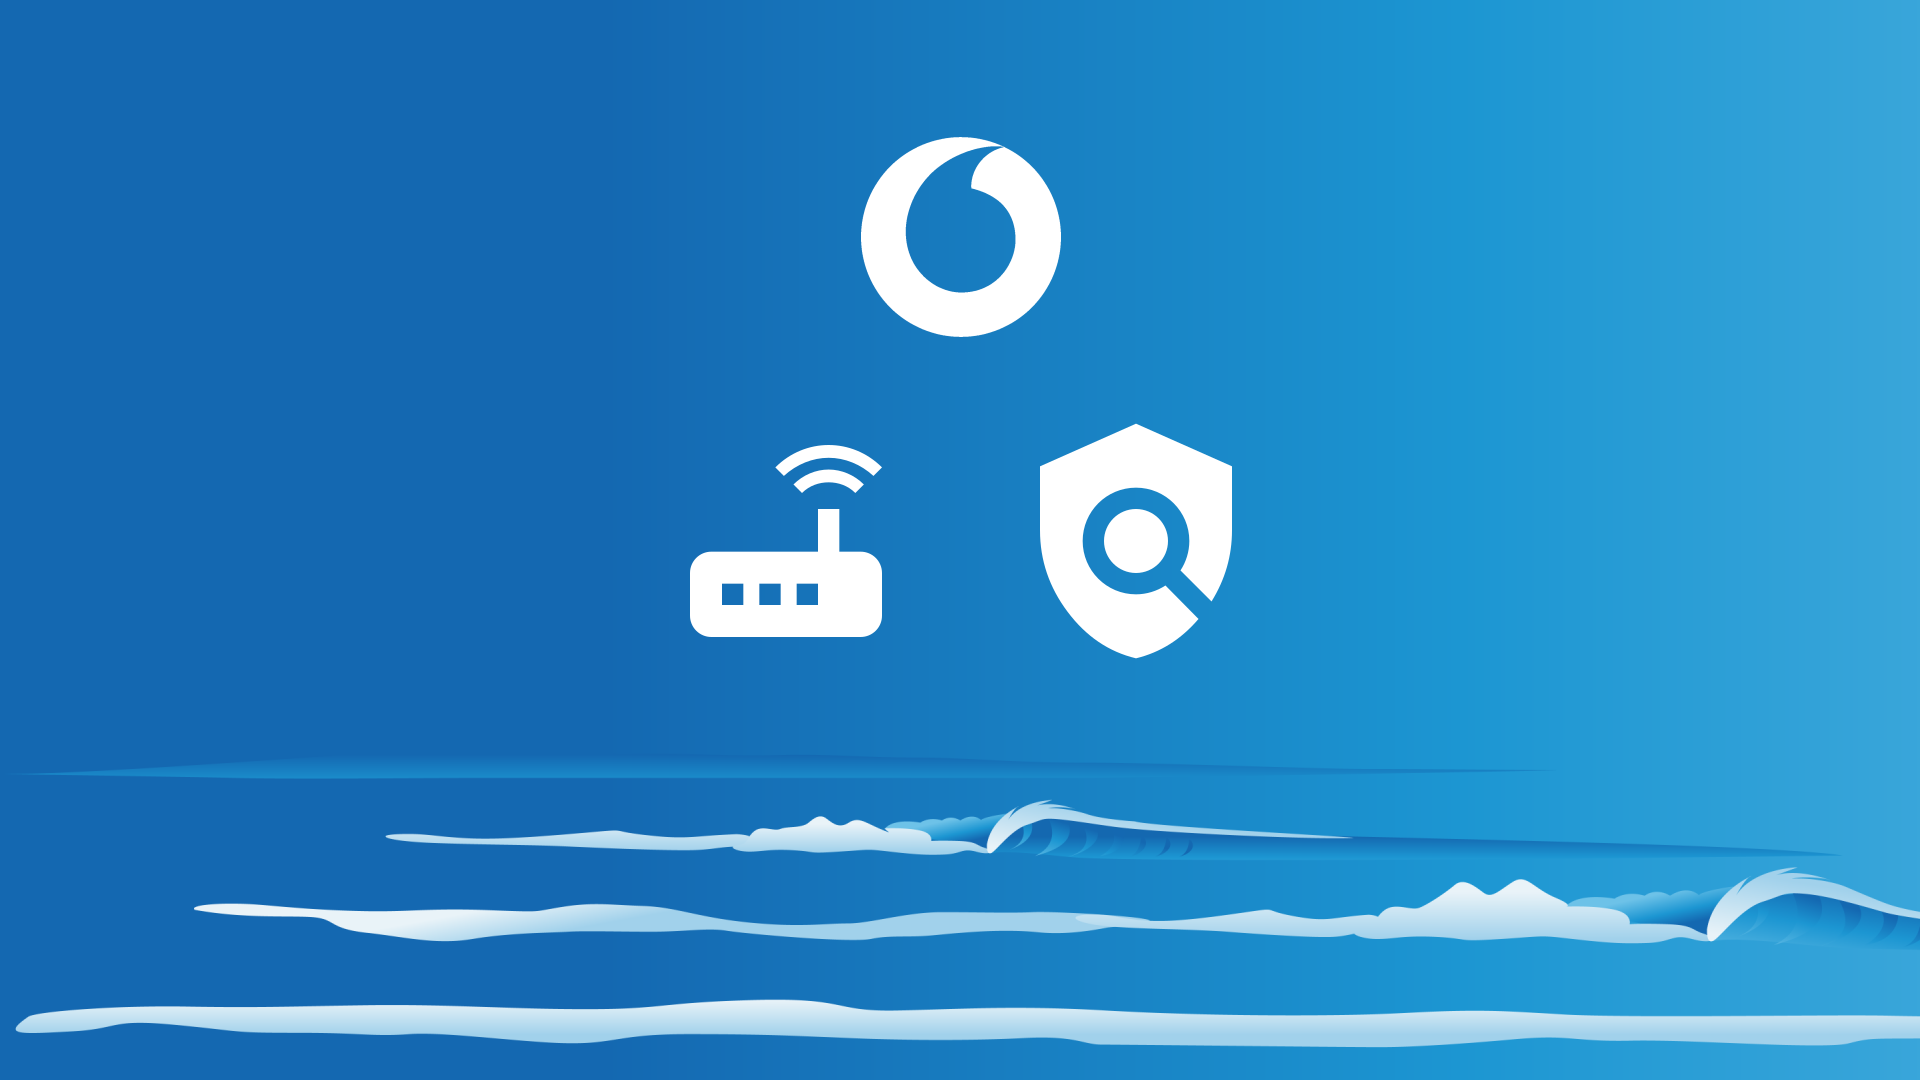 Sea background with Vodafone NZ / One NZ logo and wireless router icon